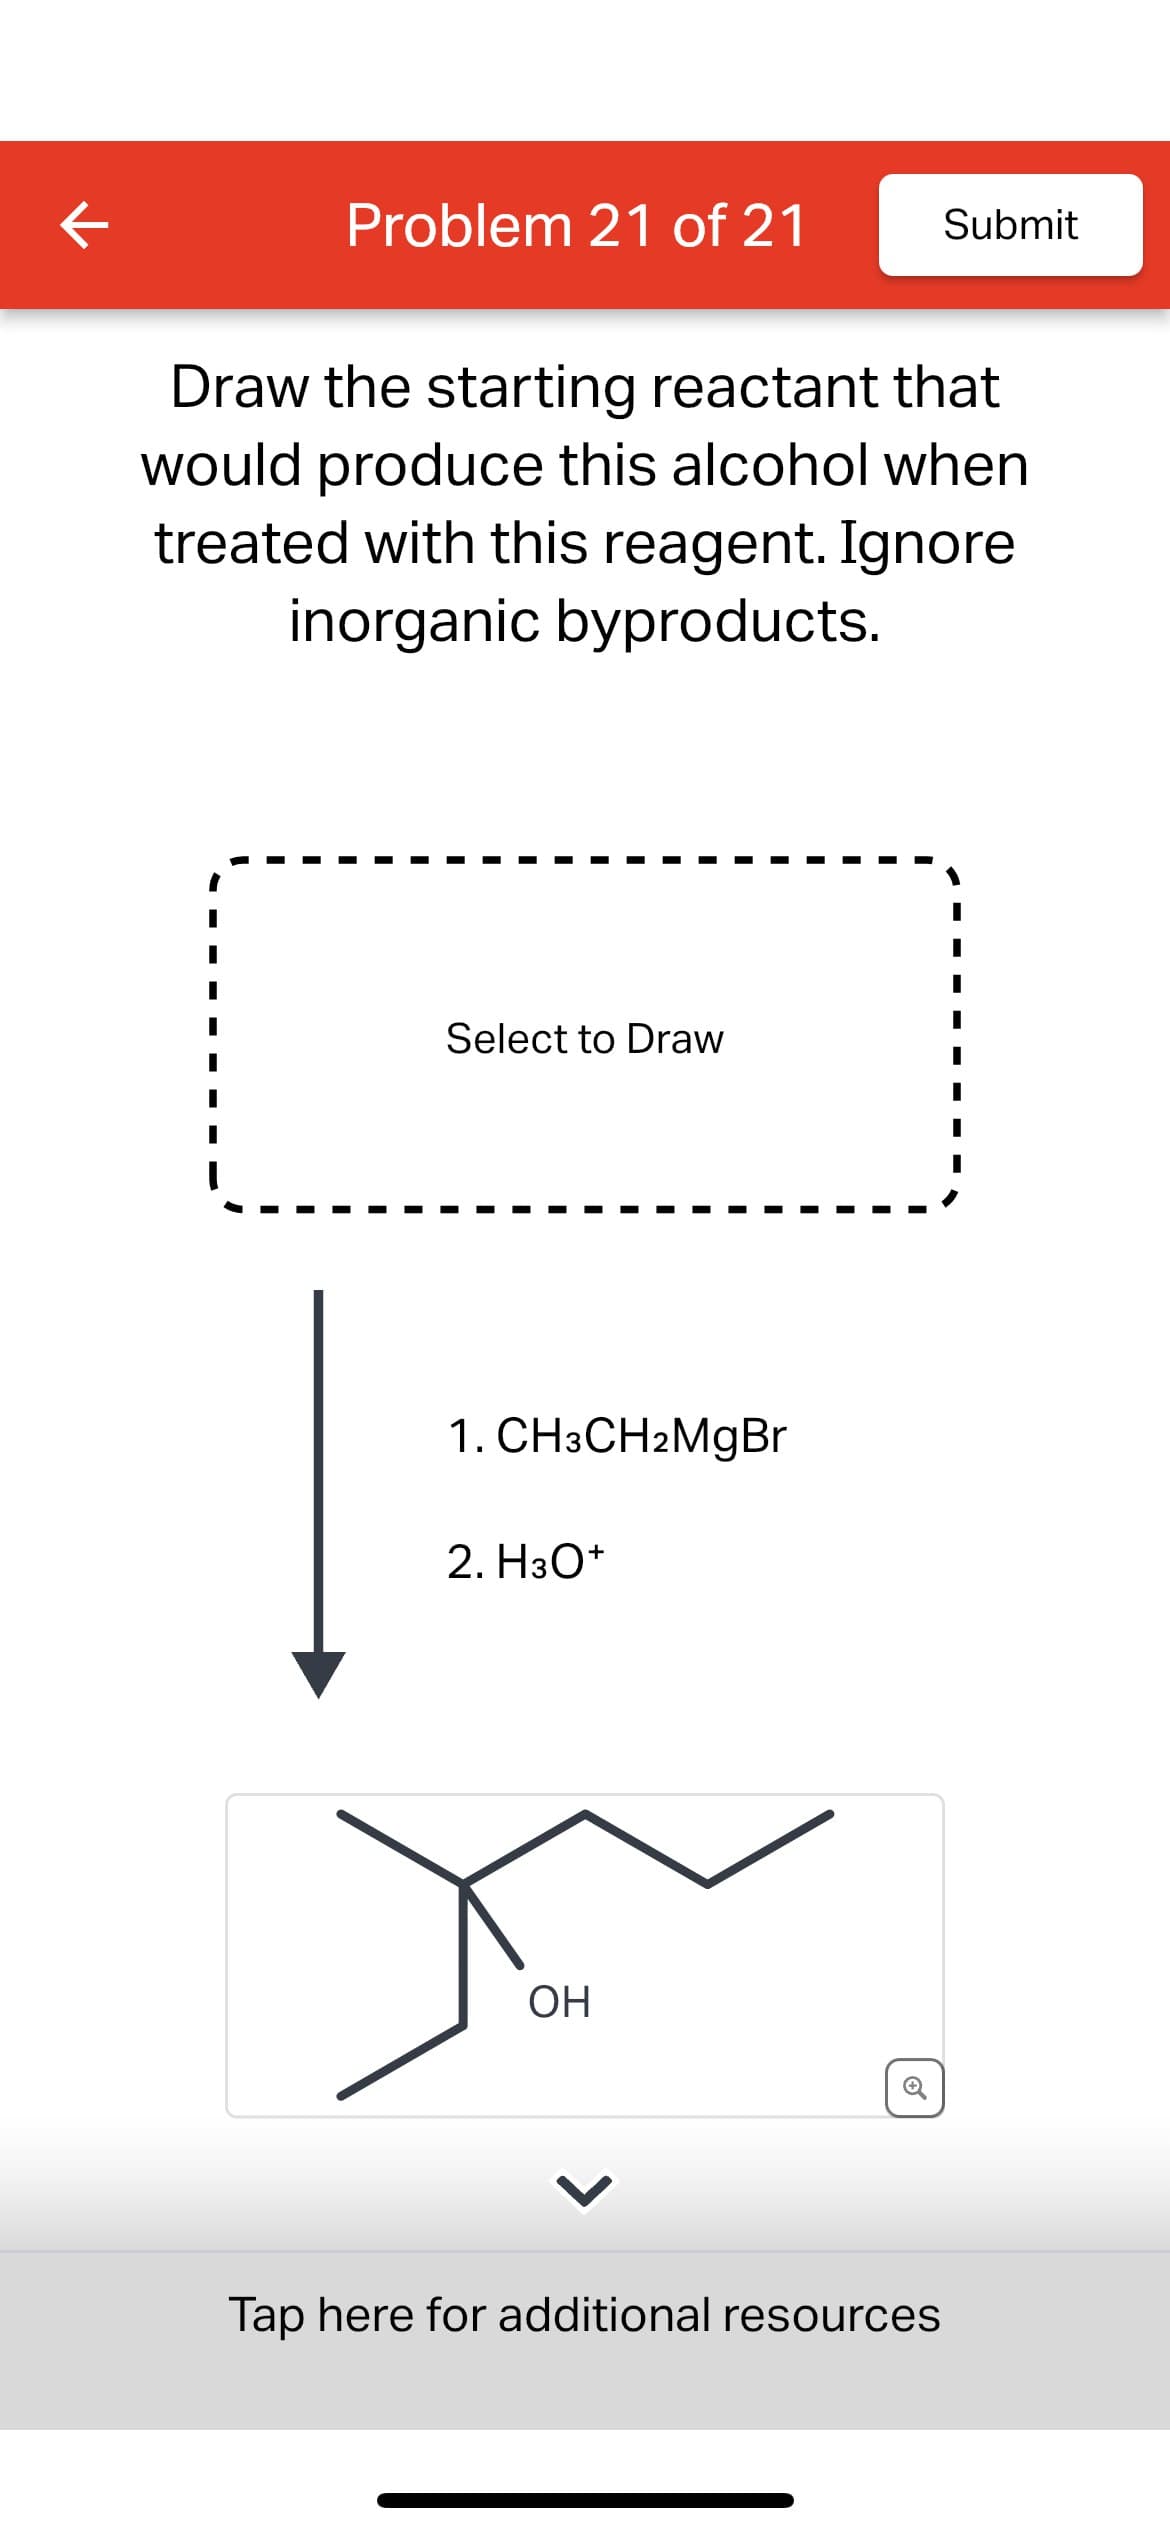 K
Problem 21 of 21
Submit
Draw the starting reactant that
would produce this alcohol when
treated with this reagent. Ignore
inorganic byproducts.
Select to Draw
1. CH3CH2MgBr
2. H3O+
OH
⑥
Tap here for additional resources